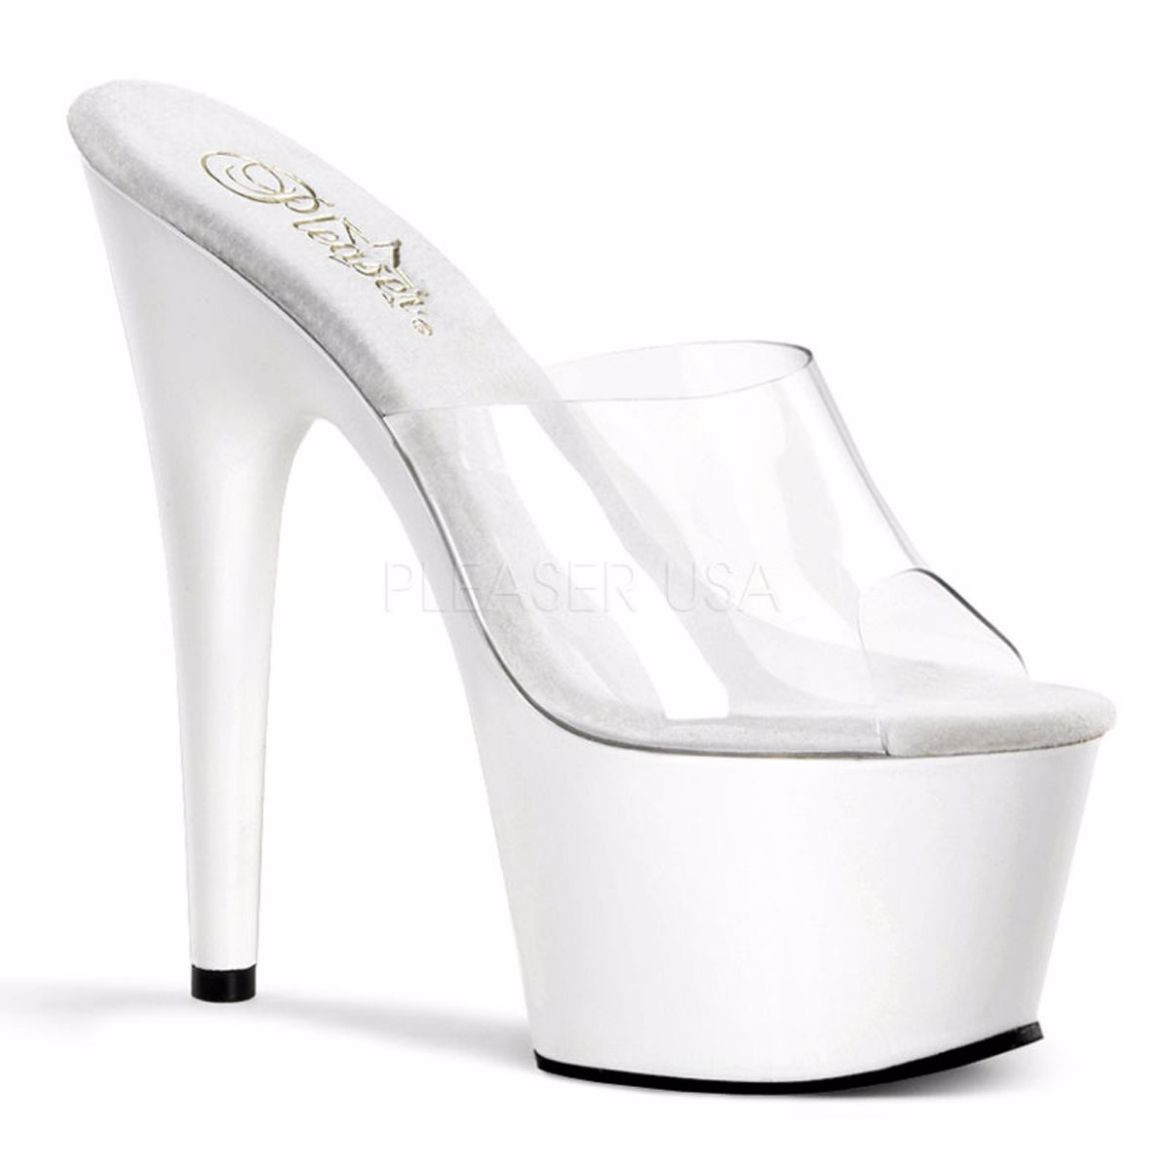 Product image of Pleaser Adore-701 Clear/White, 7 inch (17.8 cm) Heel, 2 3/4 inch (7 cm) Platform Slide Mule Shoes